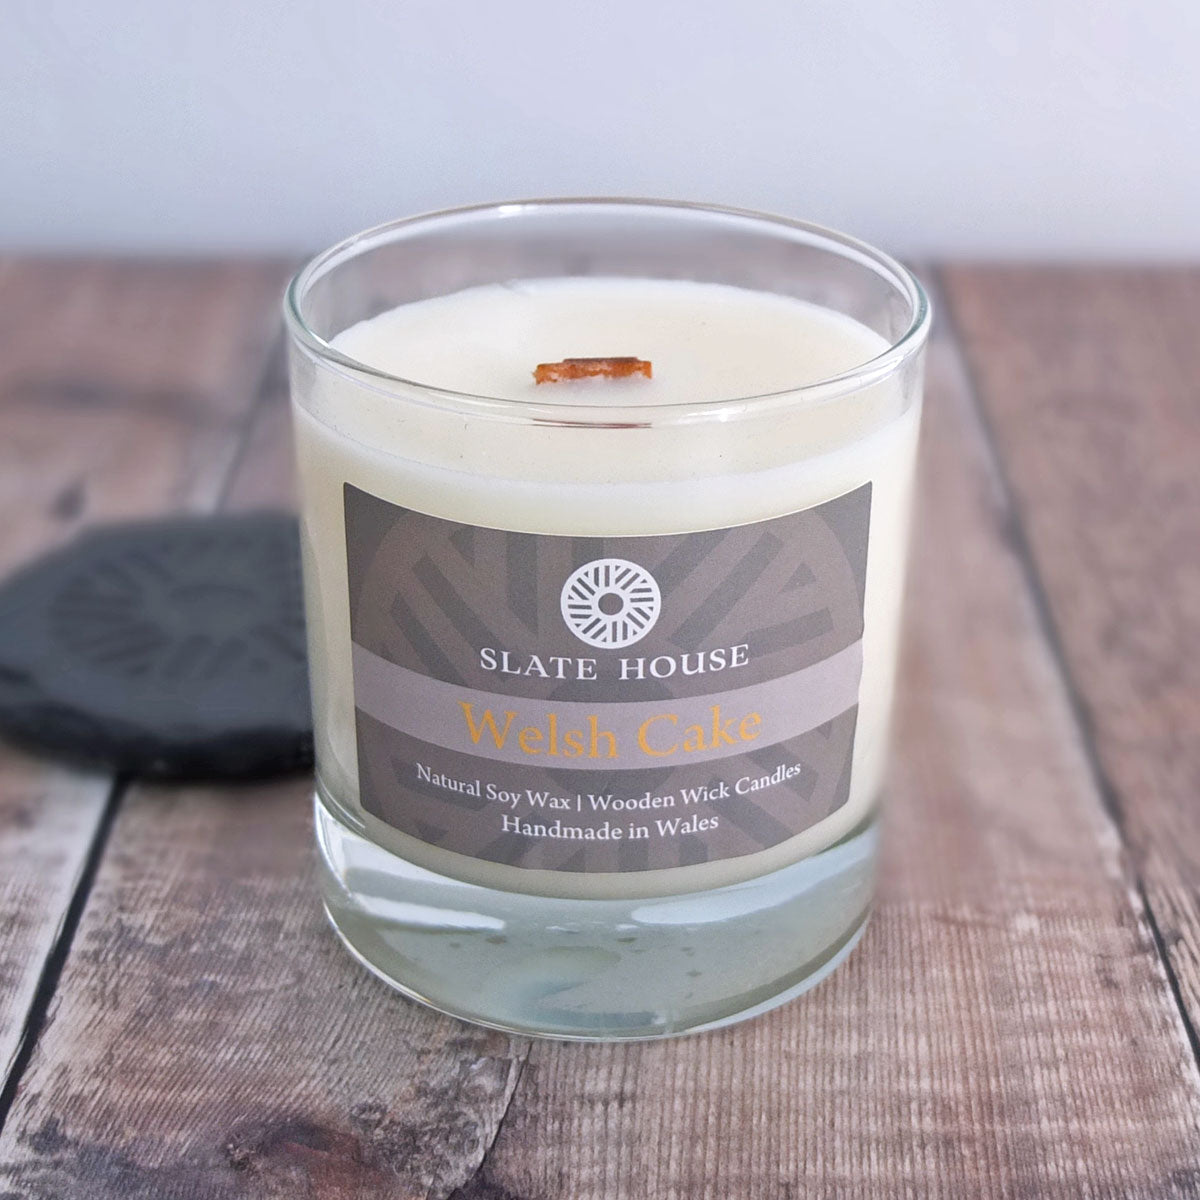 Welsh Cake Boxed Candle by Slate House